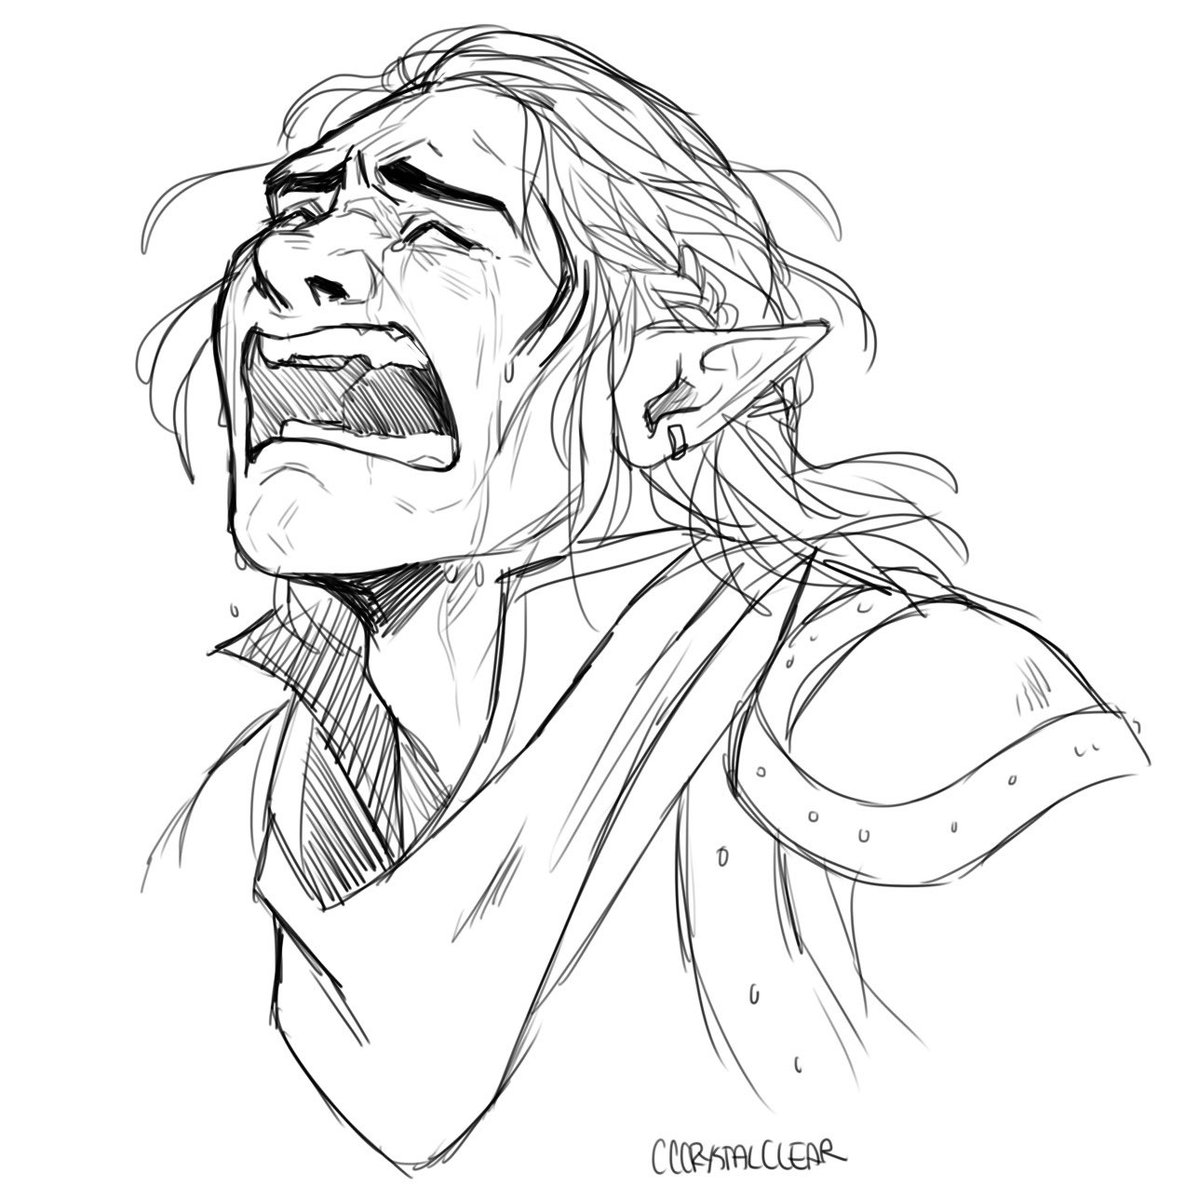 Drew this Zevran years ago as a quick sketch and it's still the best emotional picture I've done 